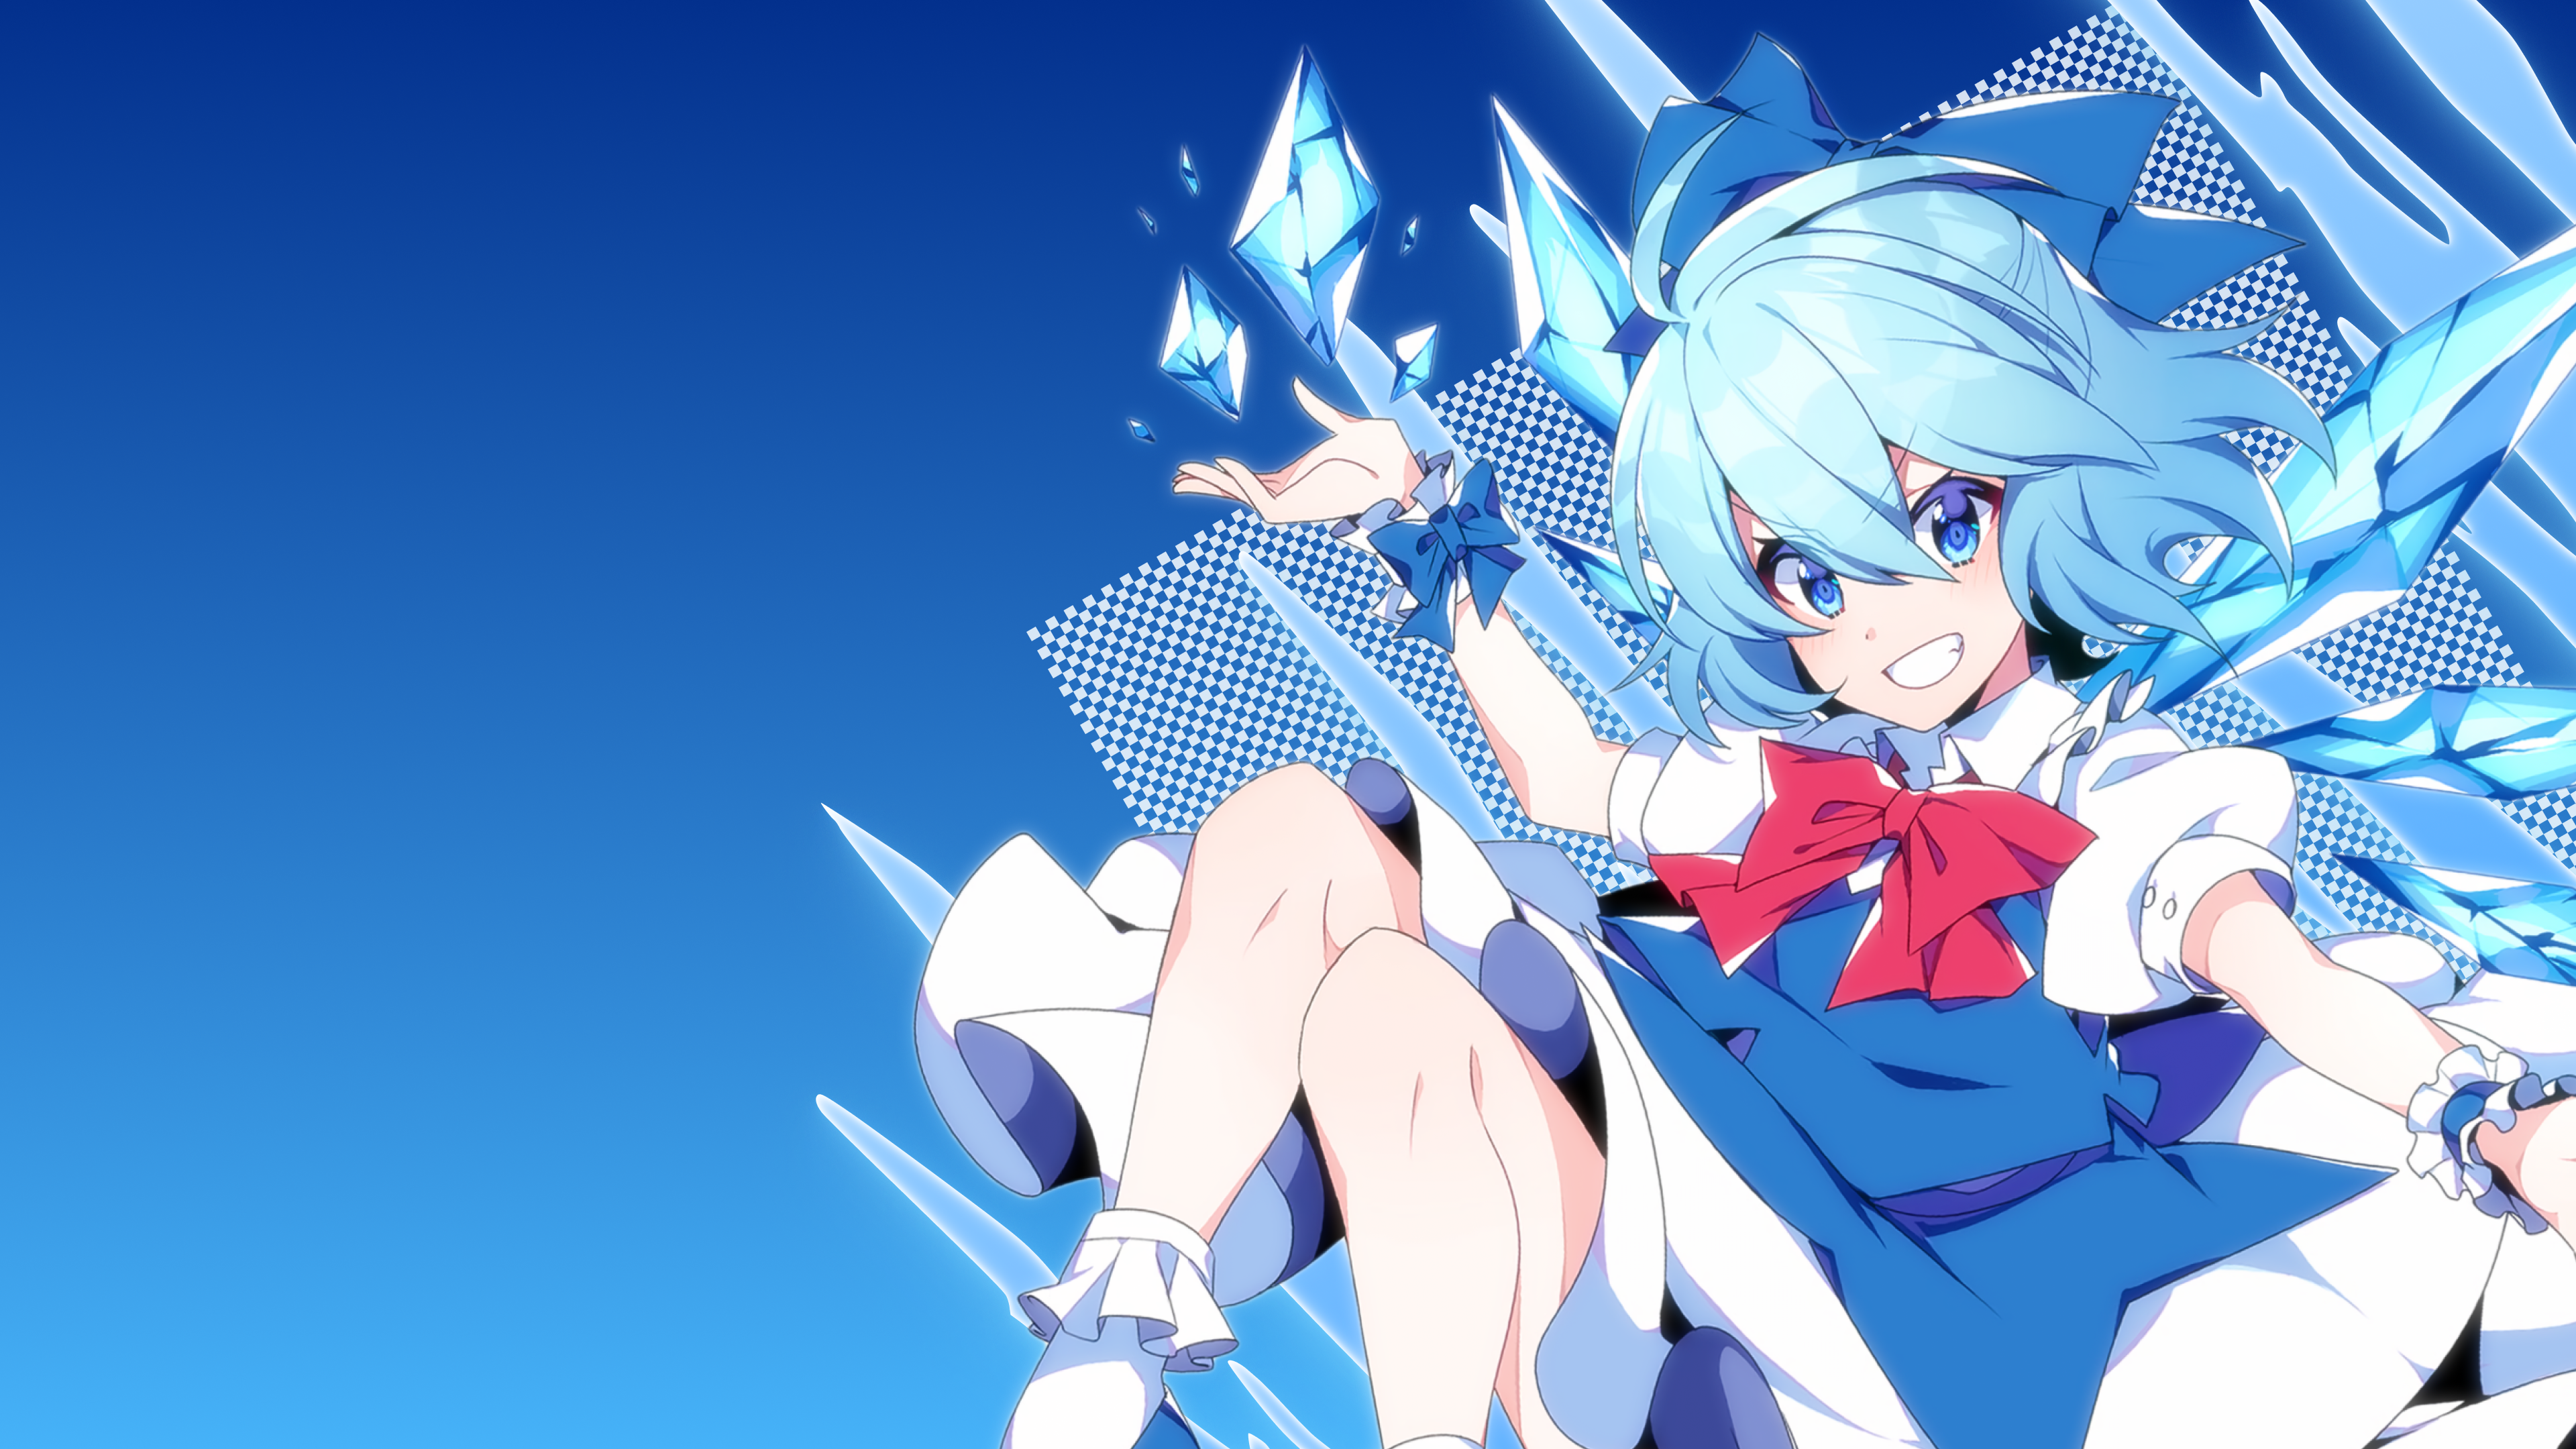 Touhou Cirno Ice Crystals Anime Girls Blue Hair Blue Eyes Blue Background 3840x2160